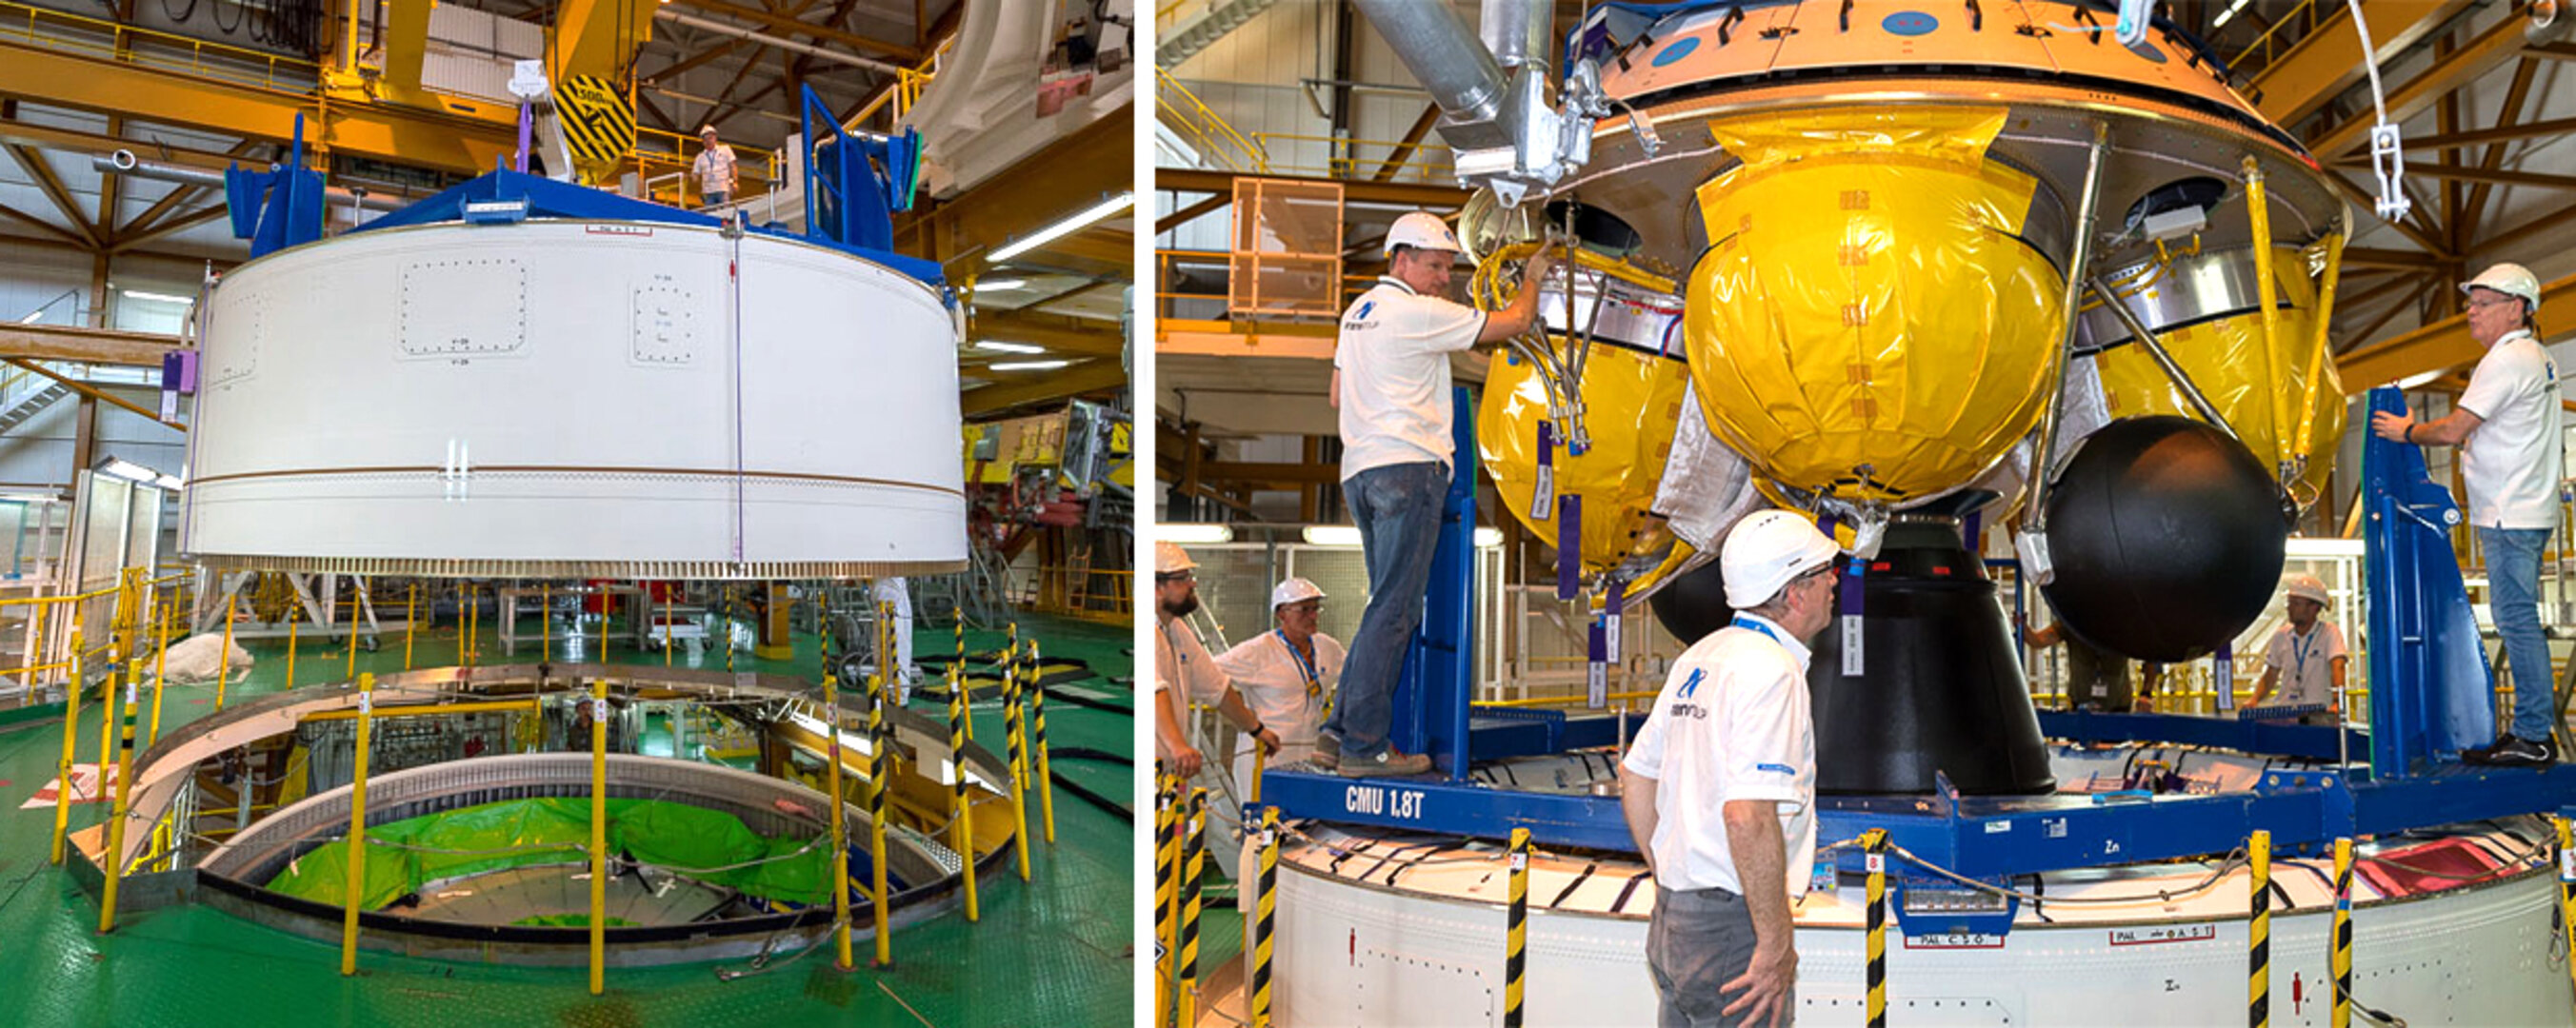 Fitting Ariane 5 together